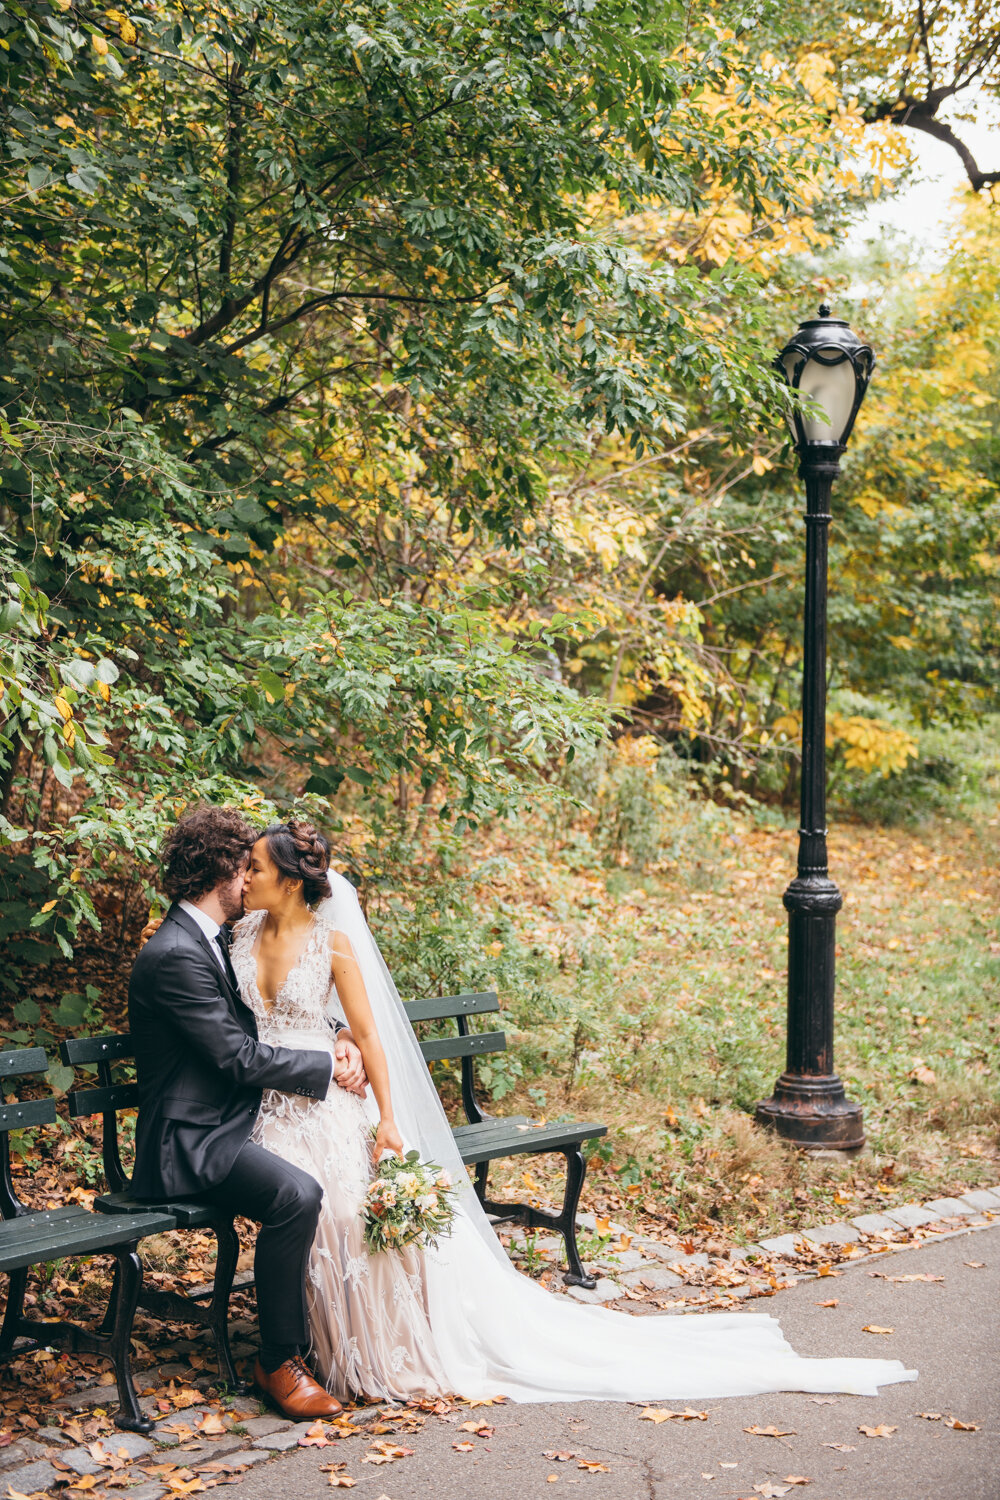 Bride and groom sit on a bench in Central Park beside a lamp pst and kiss.

Central Park Wedding Photography. Williamsburg Bridge Bridal Portraits. Luxury NYC Wedding Photographer. Manhattan Micro Wedding.